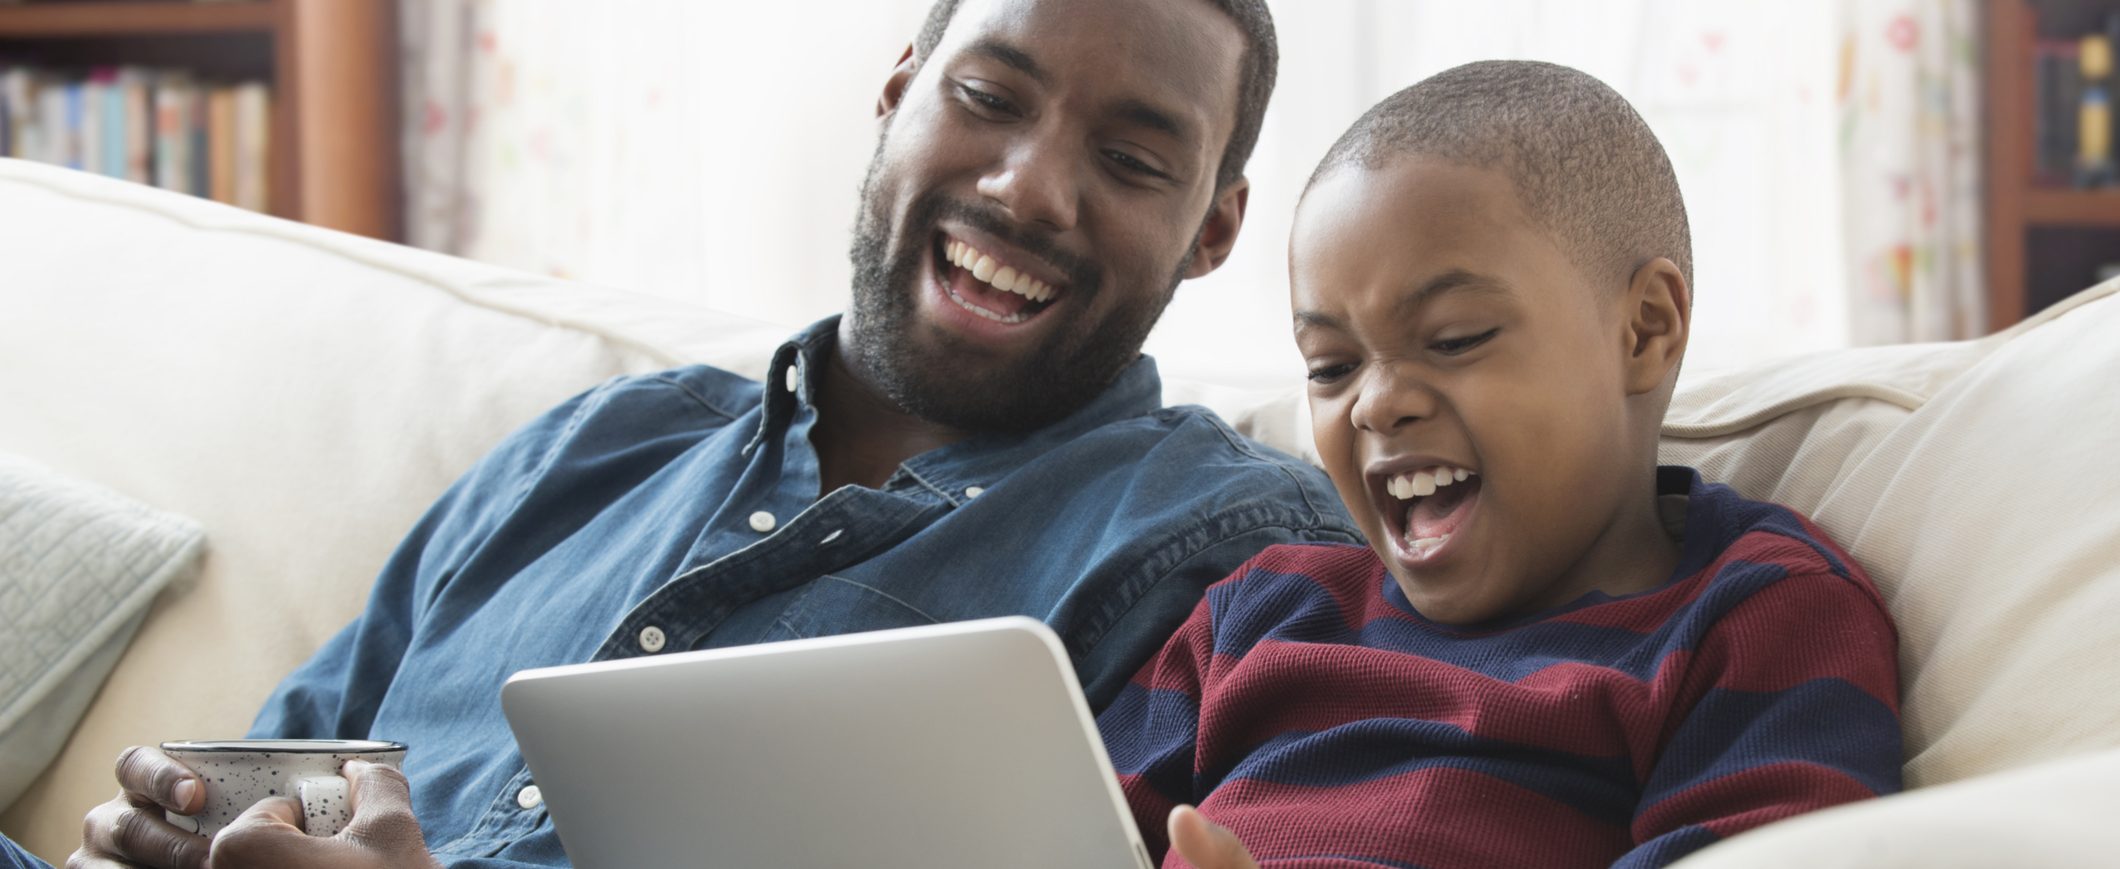 Father and son stream their favorite show rather than paying for cable